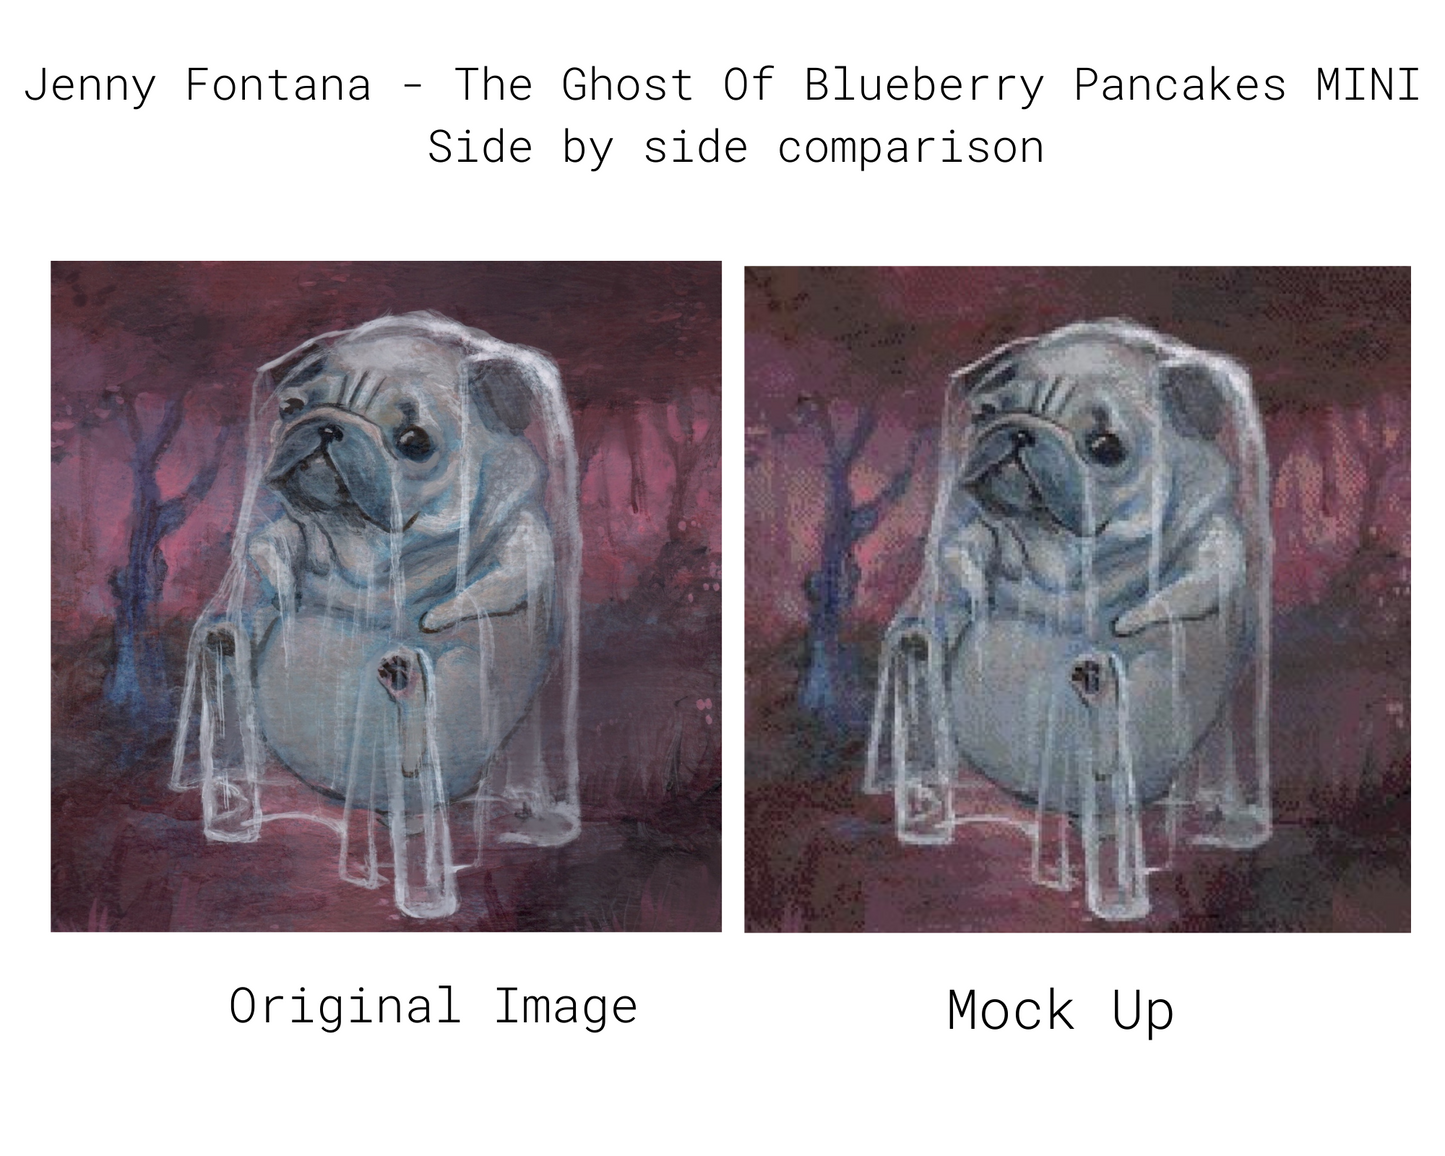 The Ghost Of Blueberry Pancakes MINI